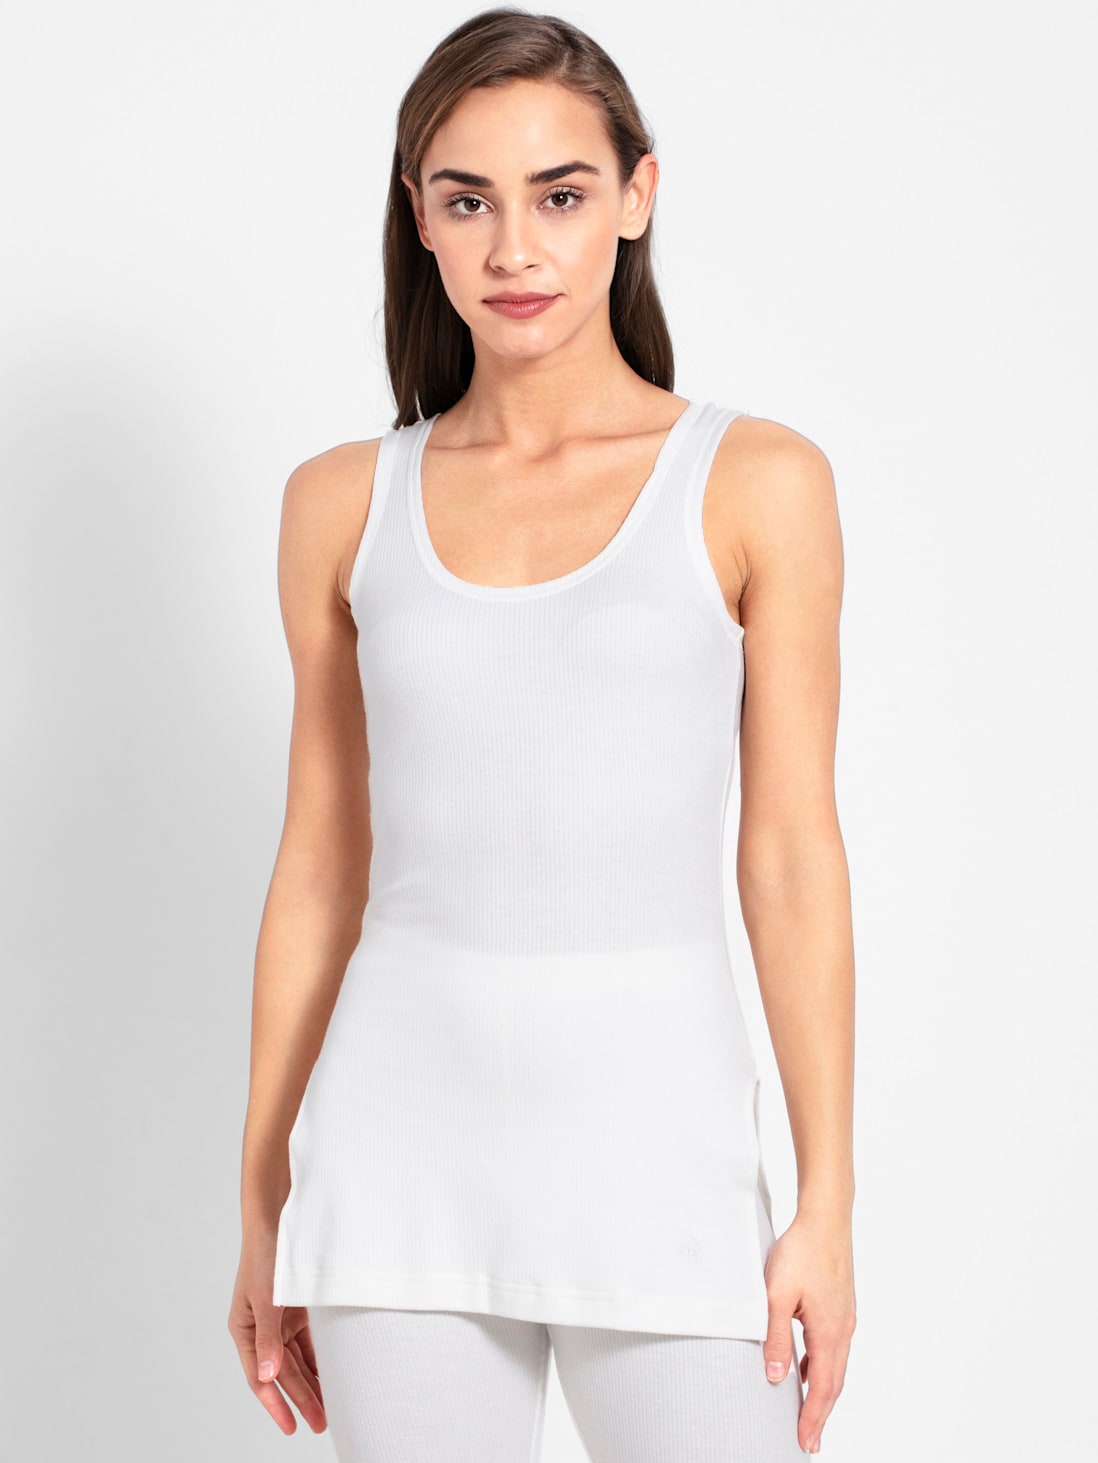 Bababy - Thermal Camisole Top